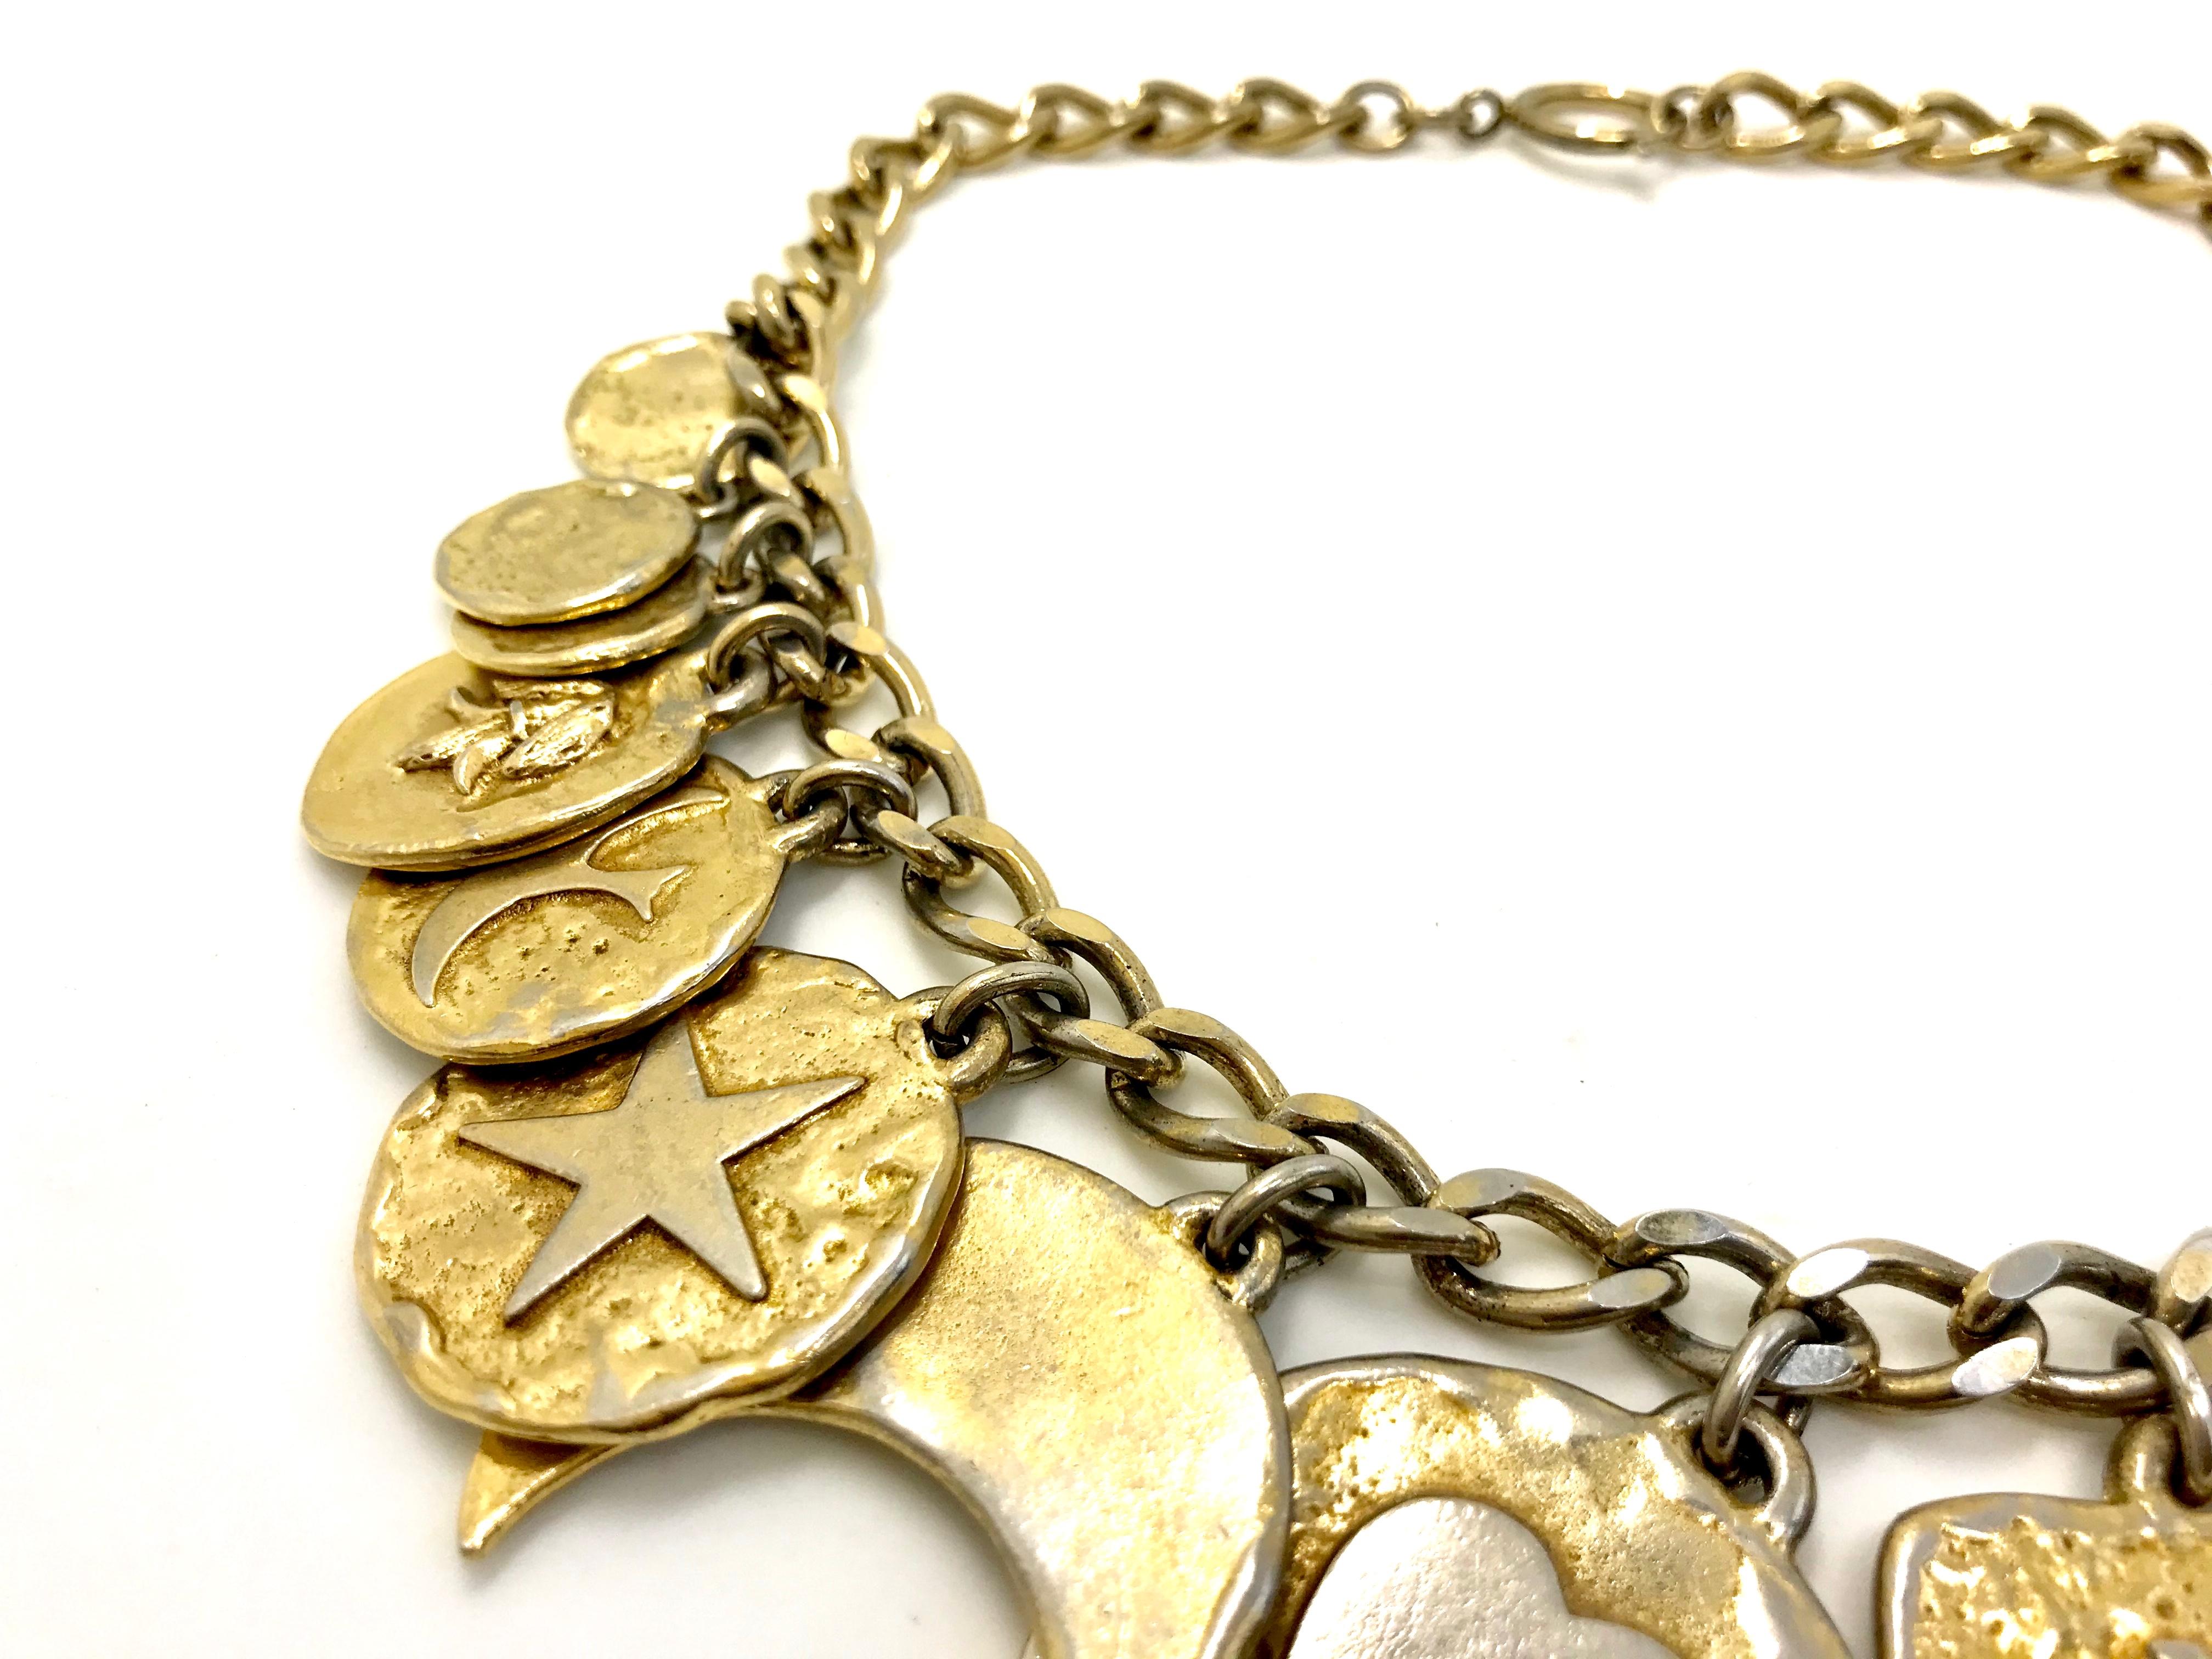 Contemporary YSL 80s vintage charm necklace